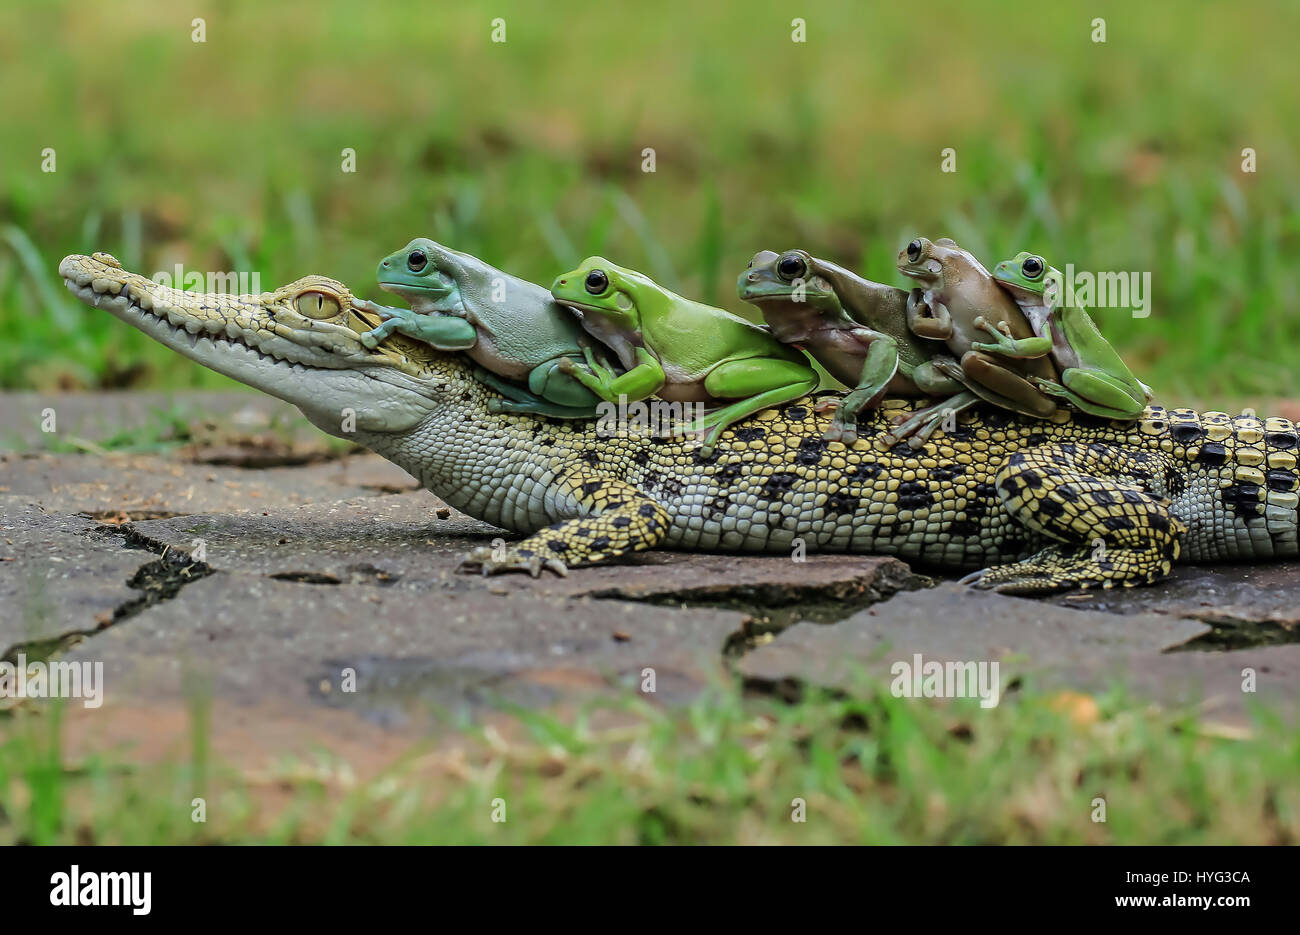 The five frogs look out from over the top of the crocodile's head. HILARIOUS images of FIVE frogs climbing on board the back of a bemused saltwater crocodile have been captured. The pictures show the dumpy white tree frogs clamber on the still crocodile one by one before turning to pose directly for the camera. Clearly comfortable in the croc’s company the amphibians appear to be doing the conga of the reptile’s back. The funny shots were snapped by Tanto Yensen (36) from Jakarta, Indonesia whilst visiting Tangerang, Indonesia. Tanto used a Canon EOS 60D to capture his photographs. Tanto Yense Stock Photo